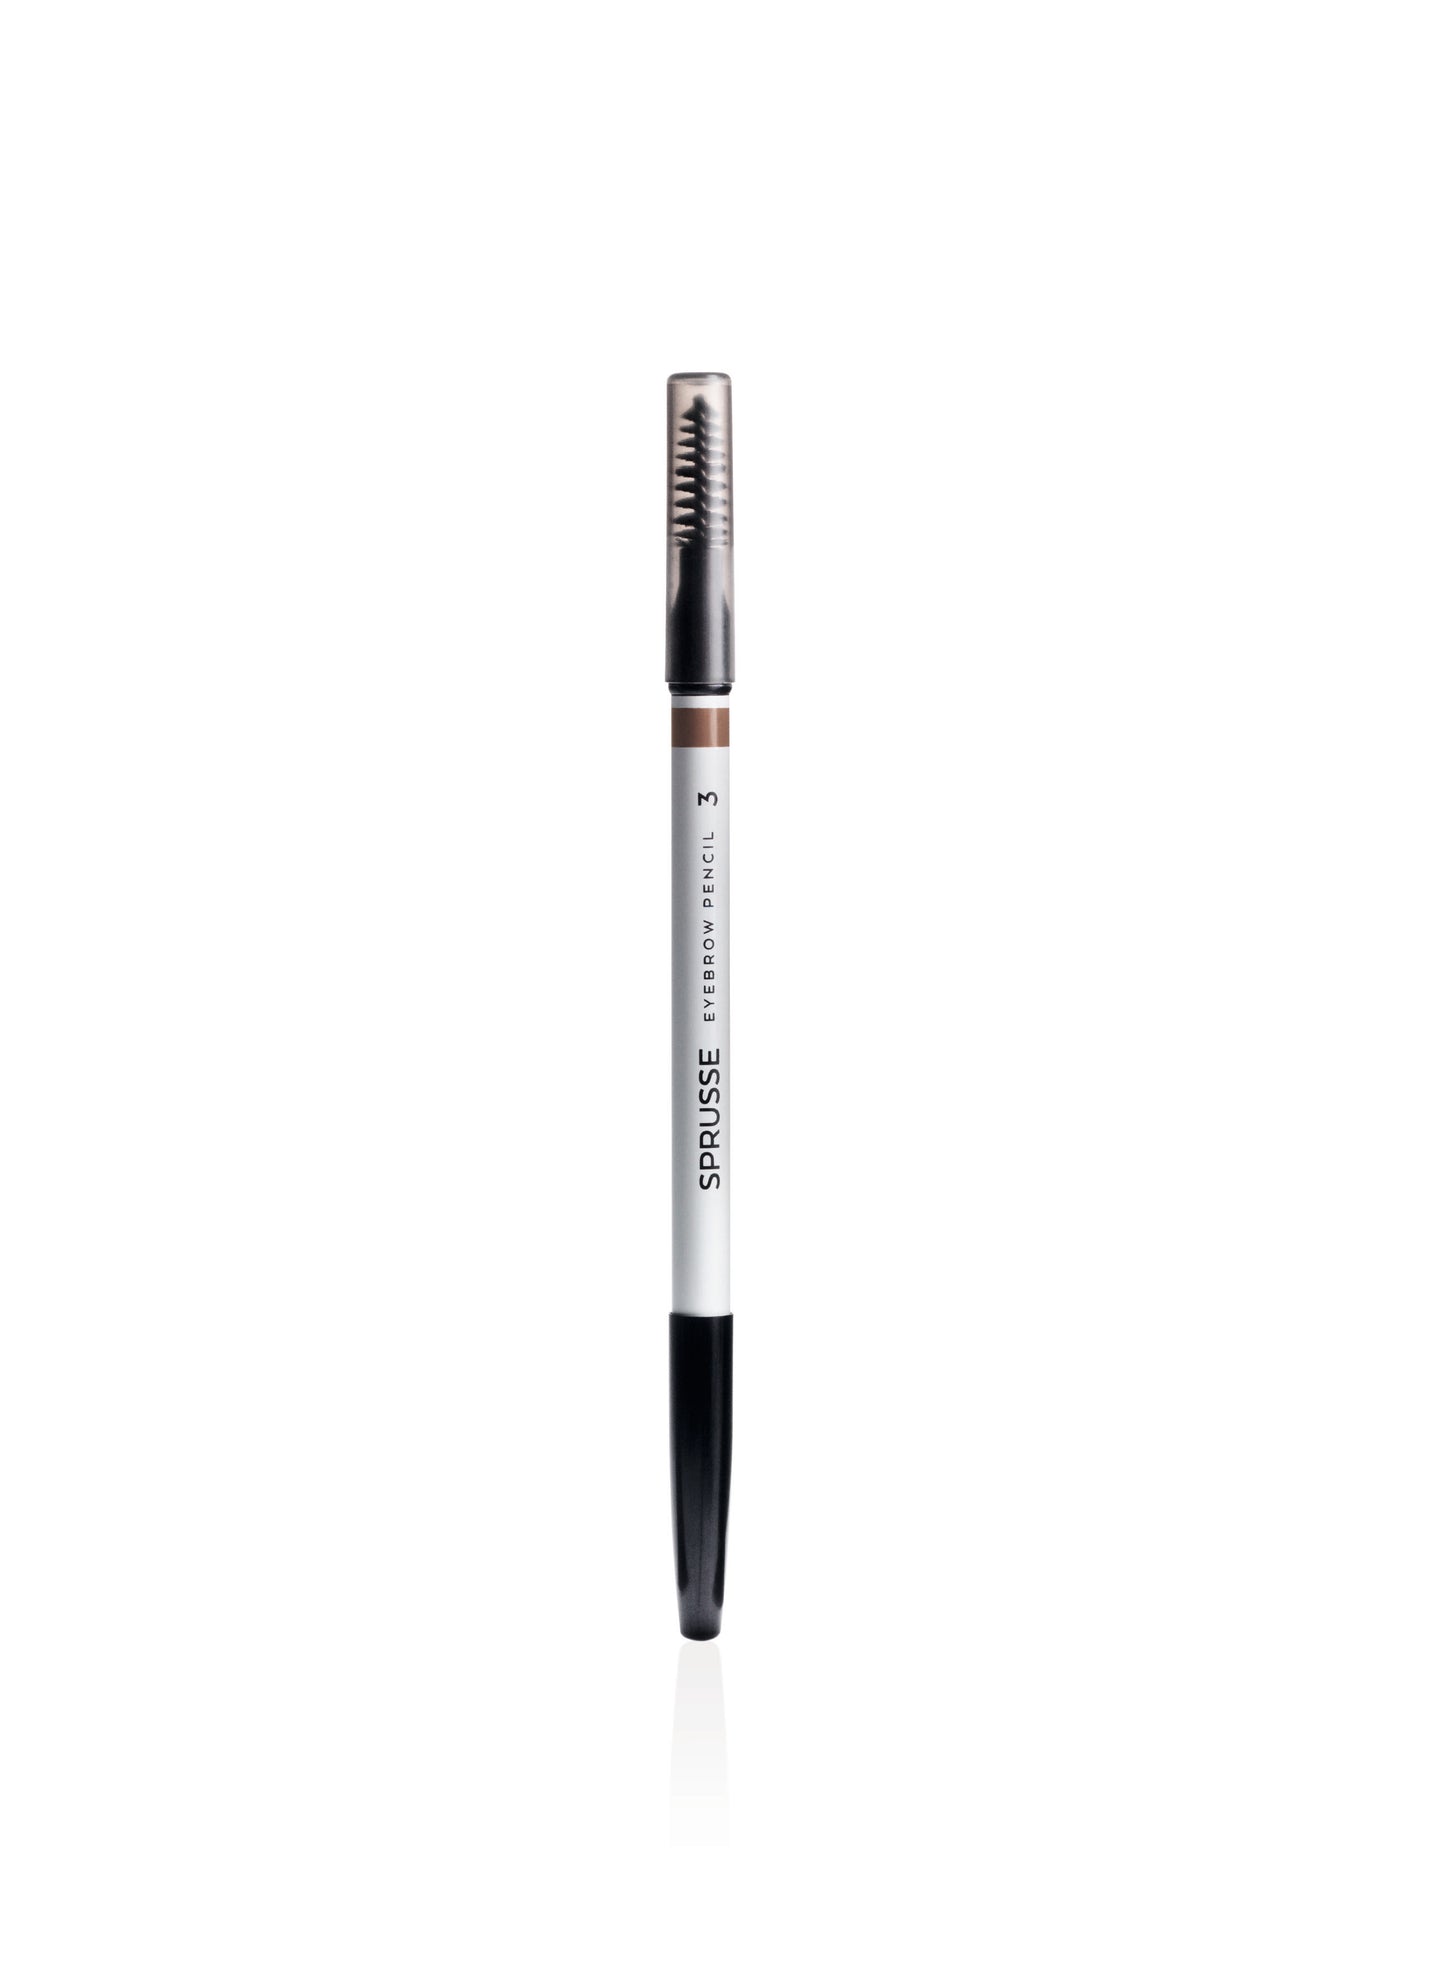 SPRUSSE Eyebrow Pencil Taupe 1,3g